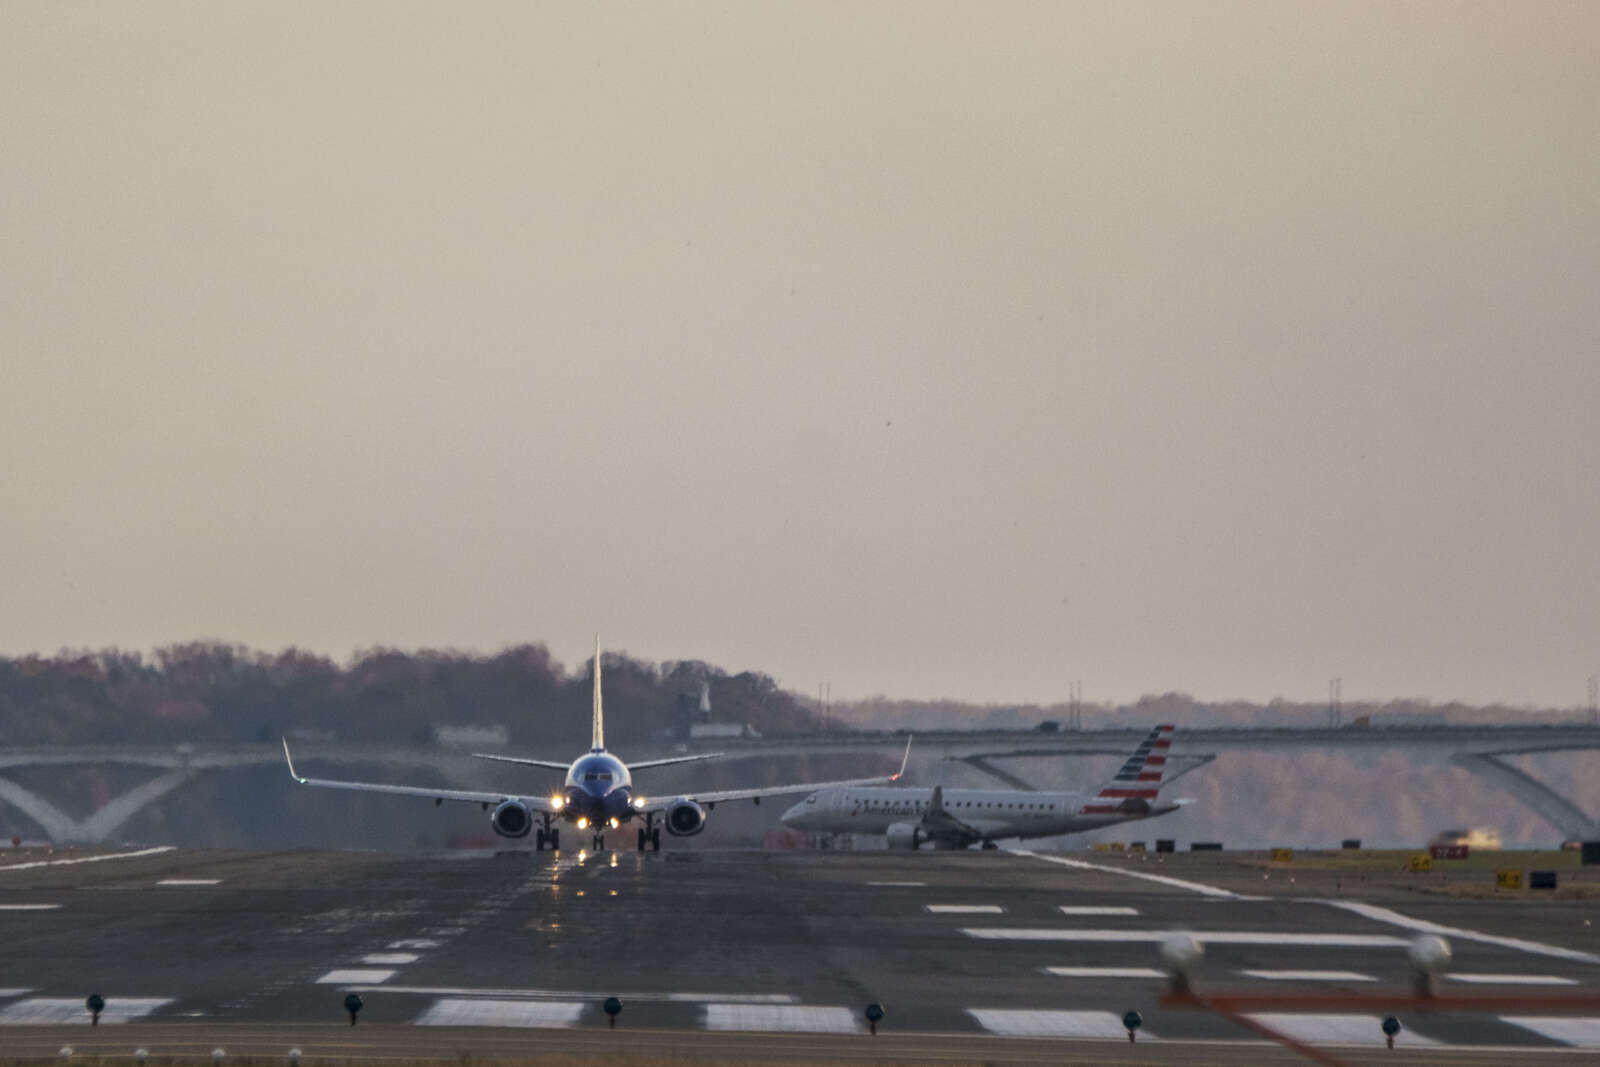 JUST IN: FAA to investigate near collision today at DCA [Video]